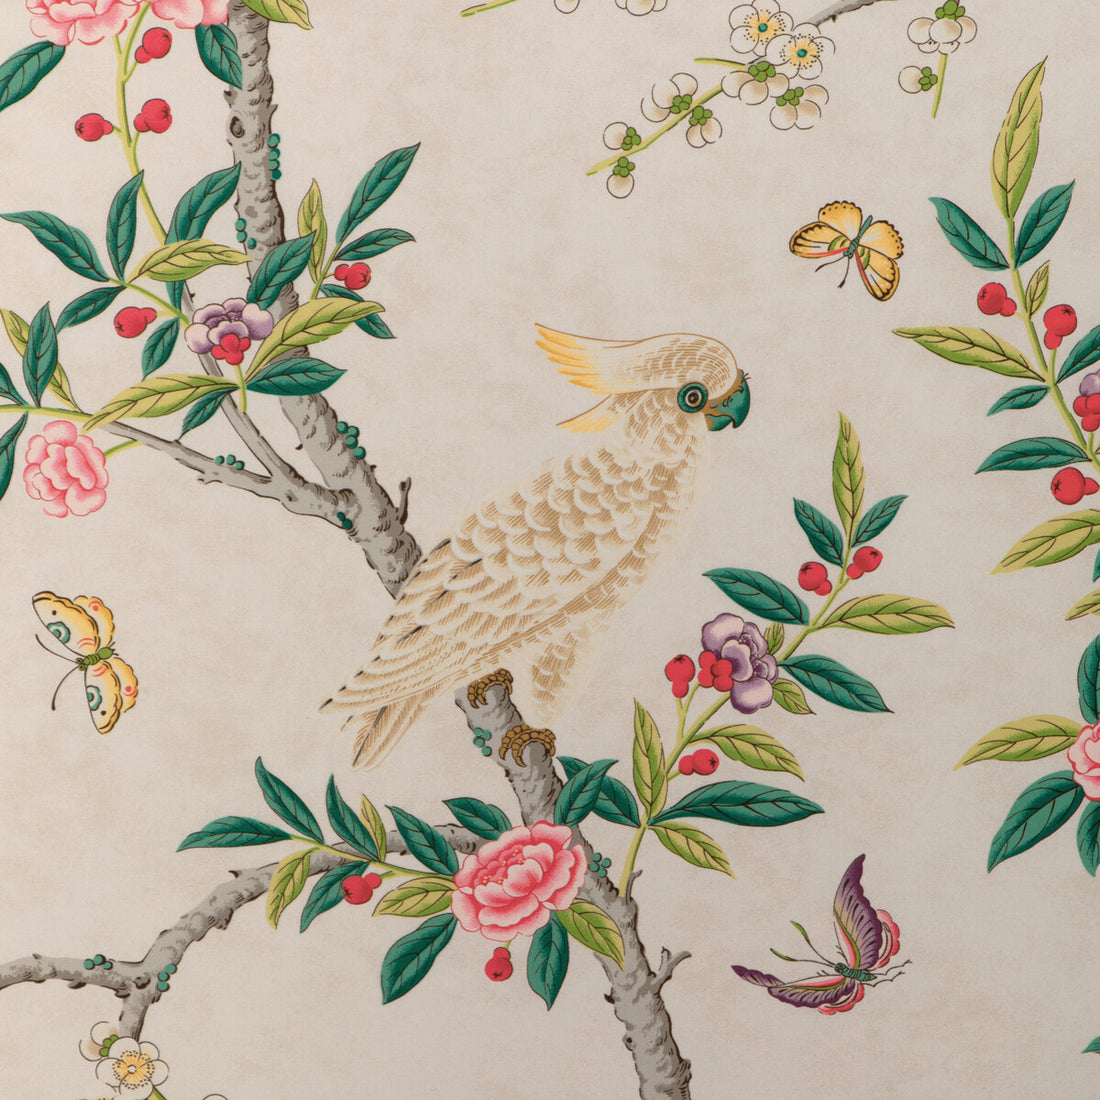 Kanchou Print fabric in multi color - pattern 8024106.1623.0 - by Brunschwig &amp; Fils in the La Menagerie collection